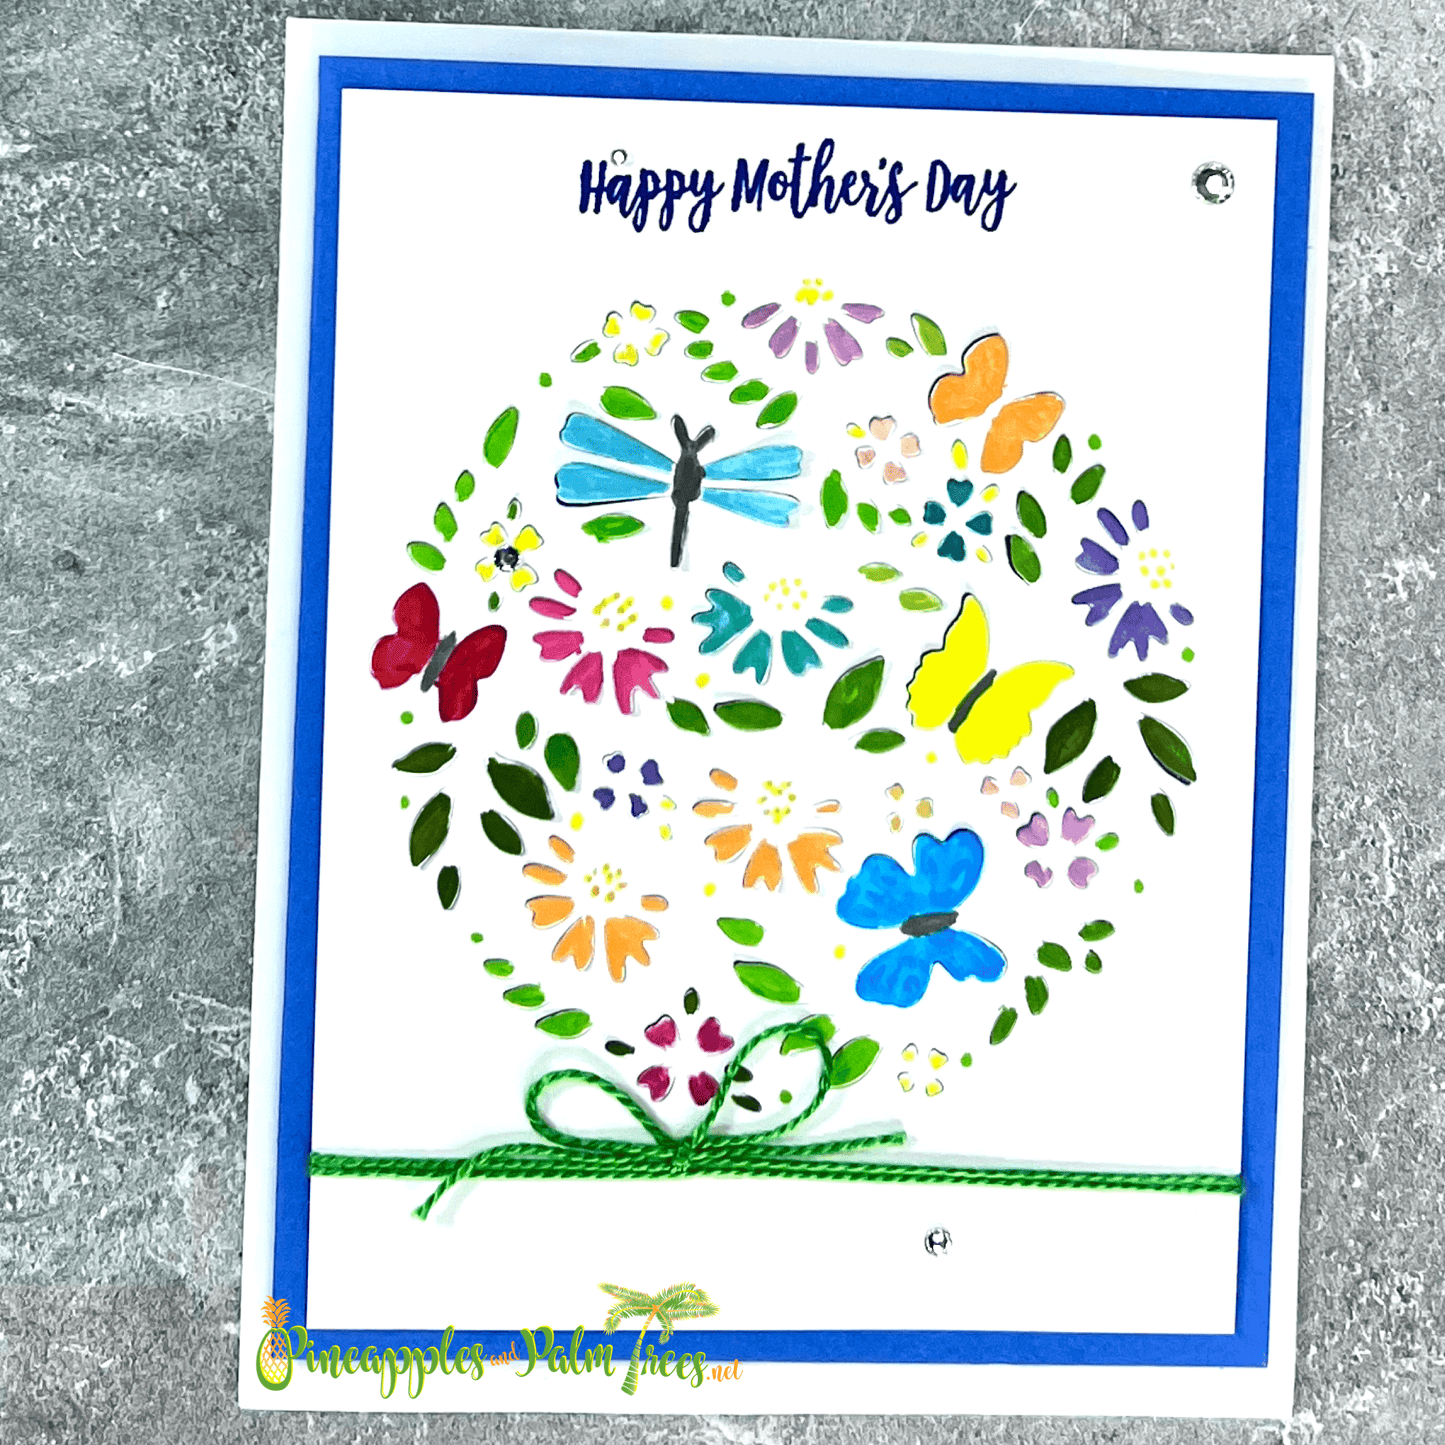 Greeting Card: Happy Mother's Day - multi round